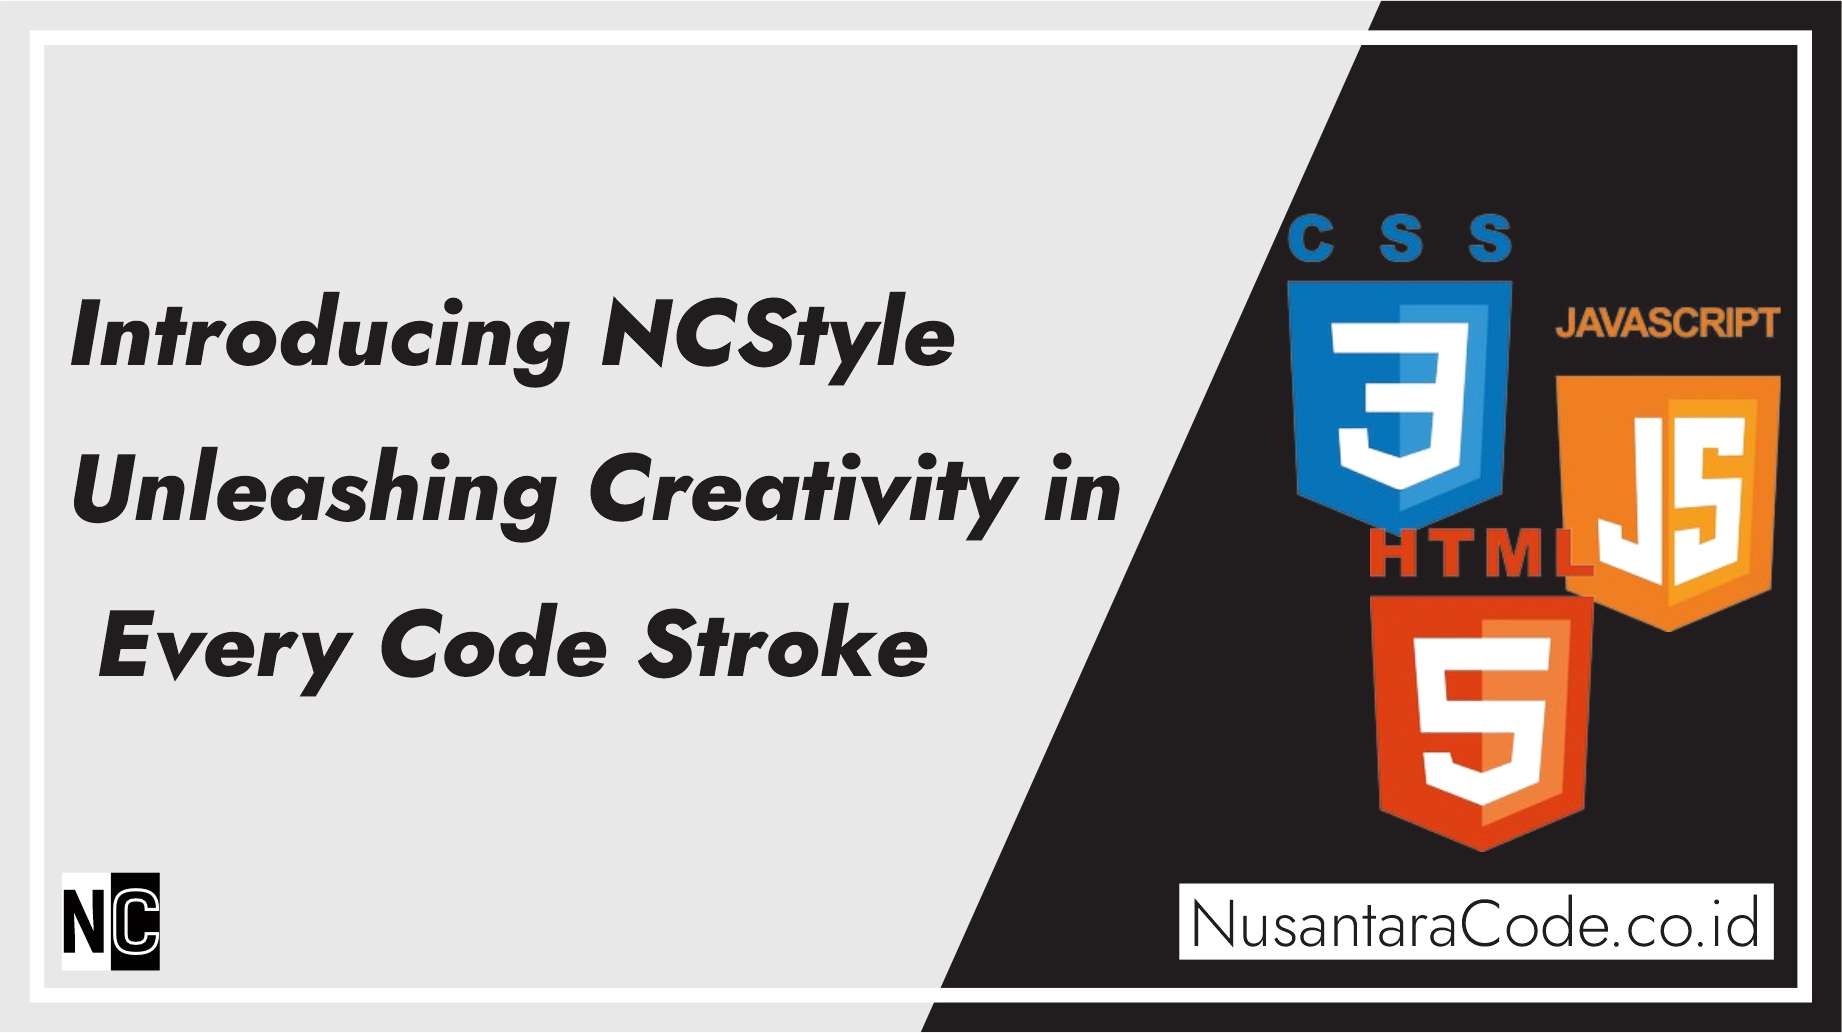 Introducing NCStyle – Unleashing Creativity in Every Code Stroke